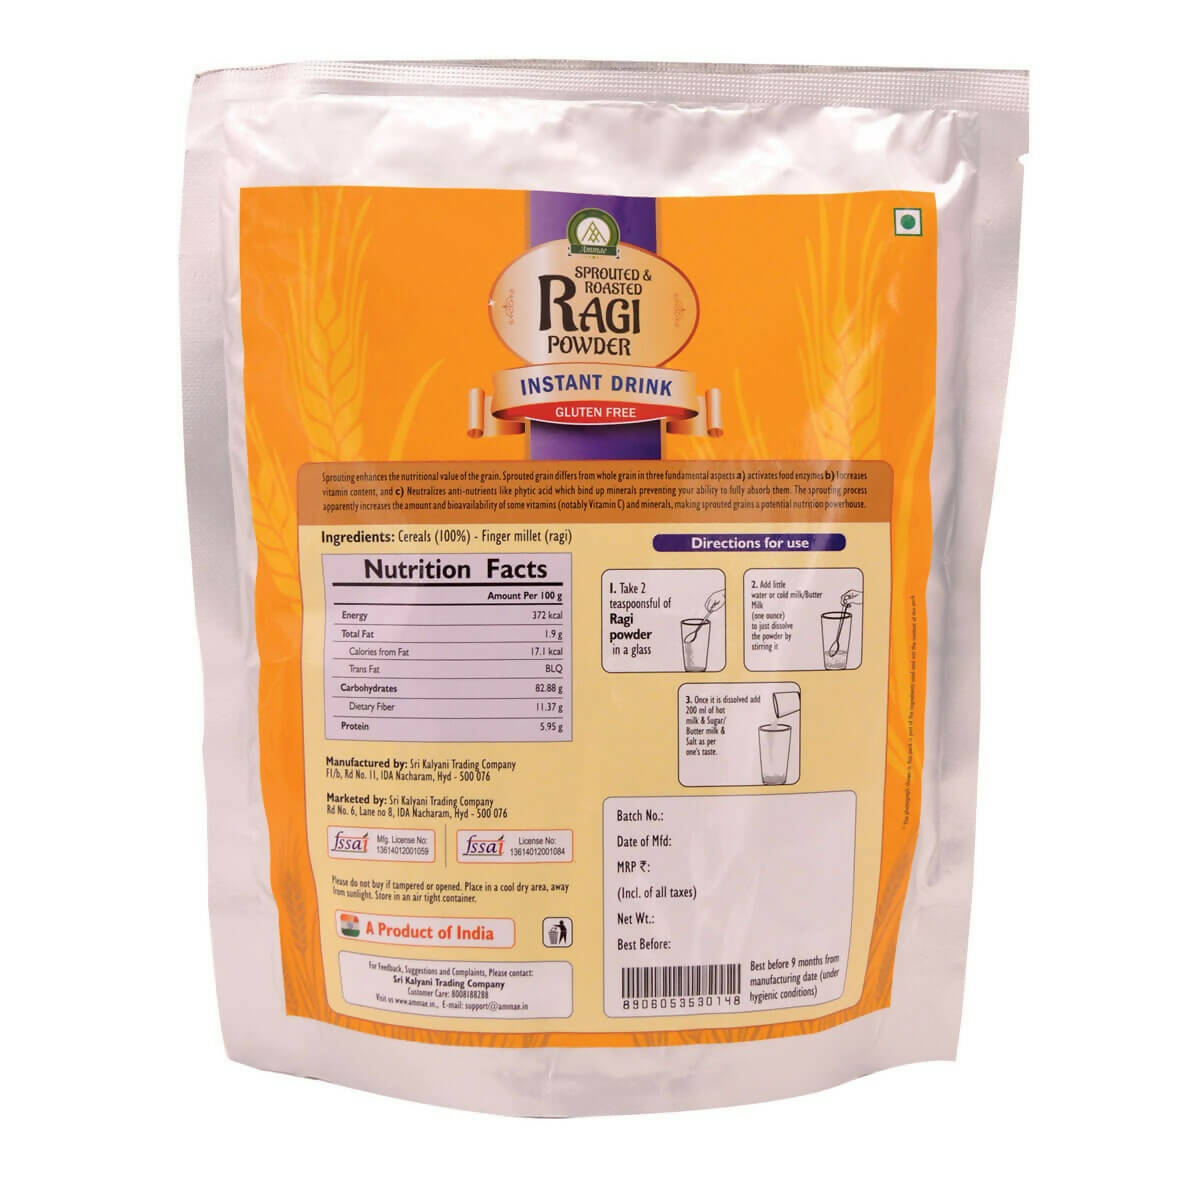 Ammae Sprouted and Roasted Ragi Powder Instant Mix - Distacart